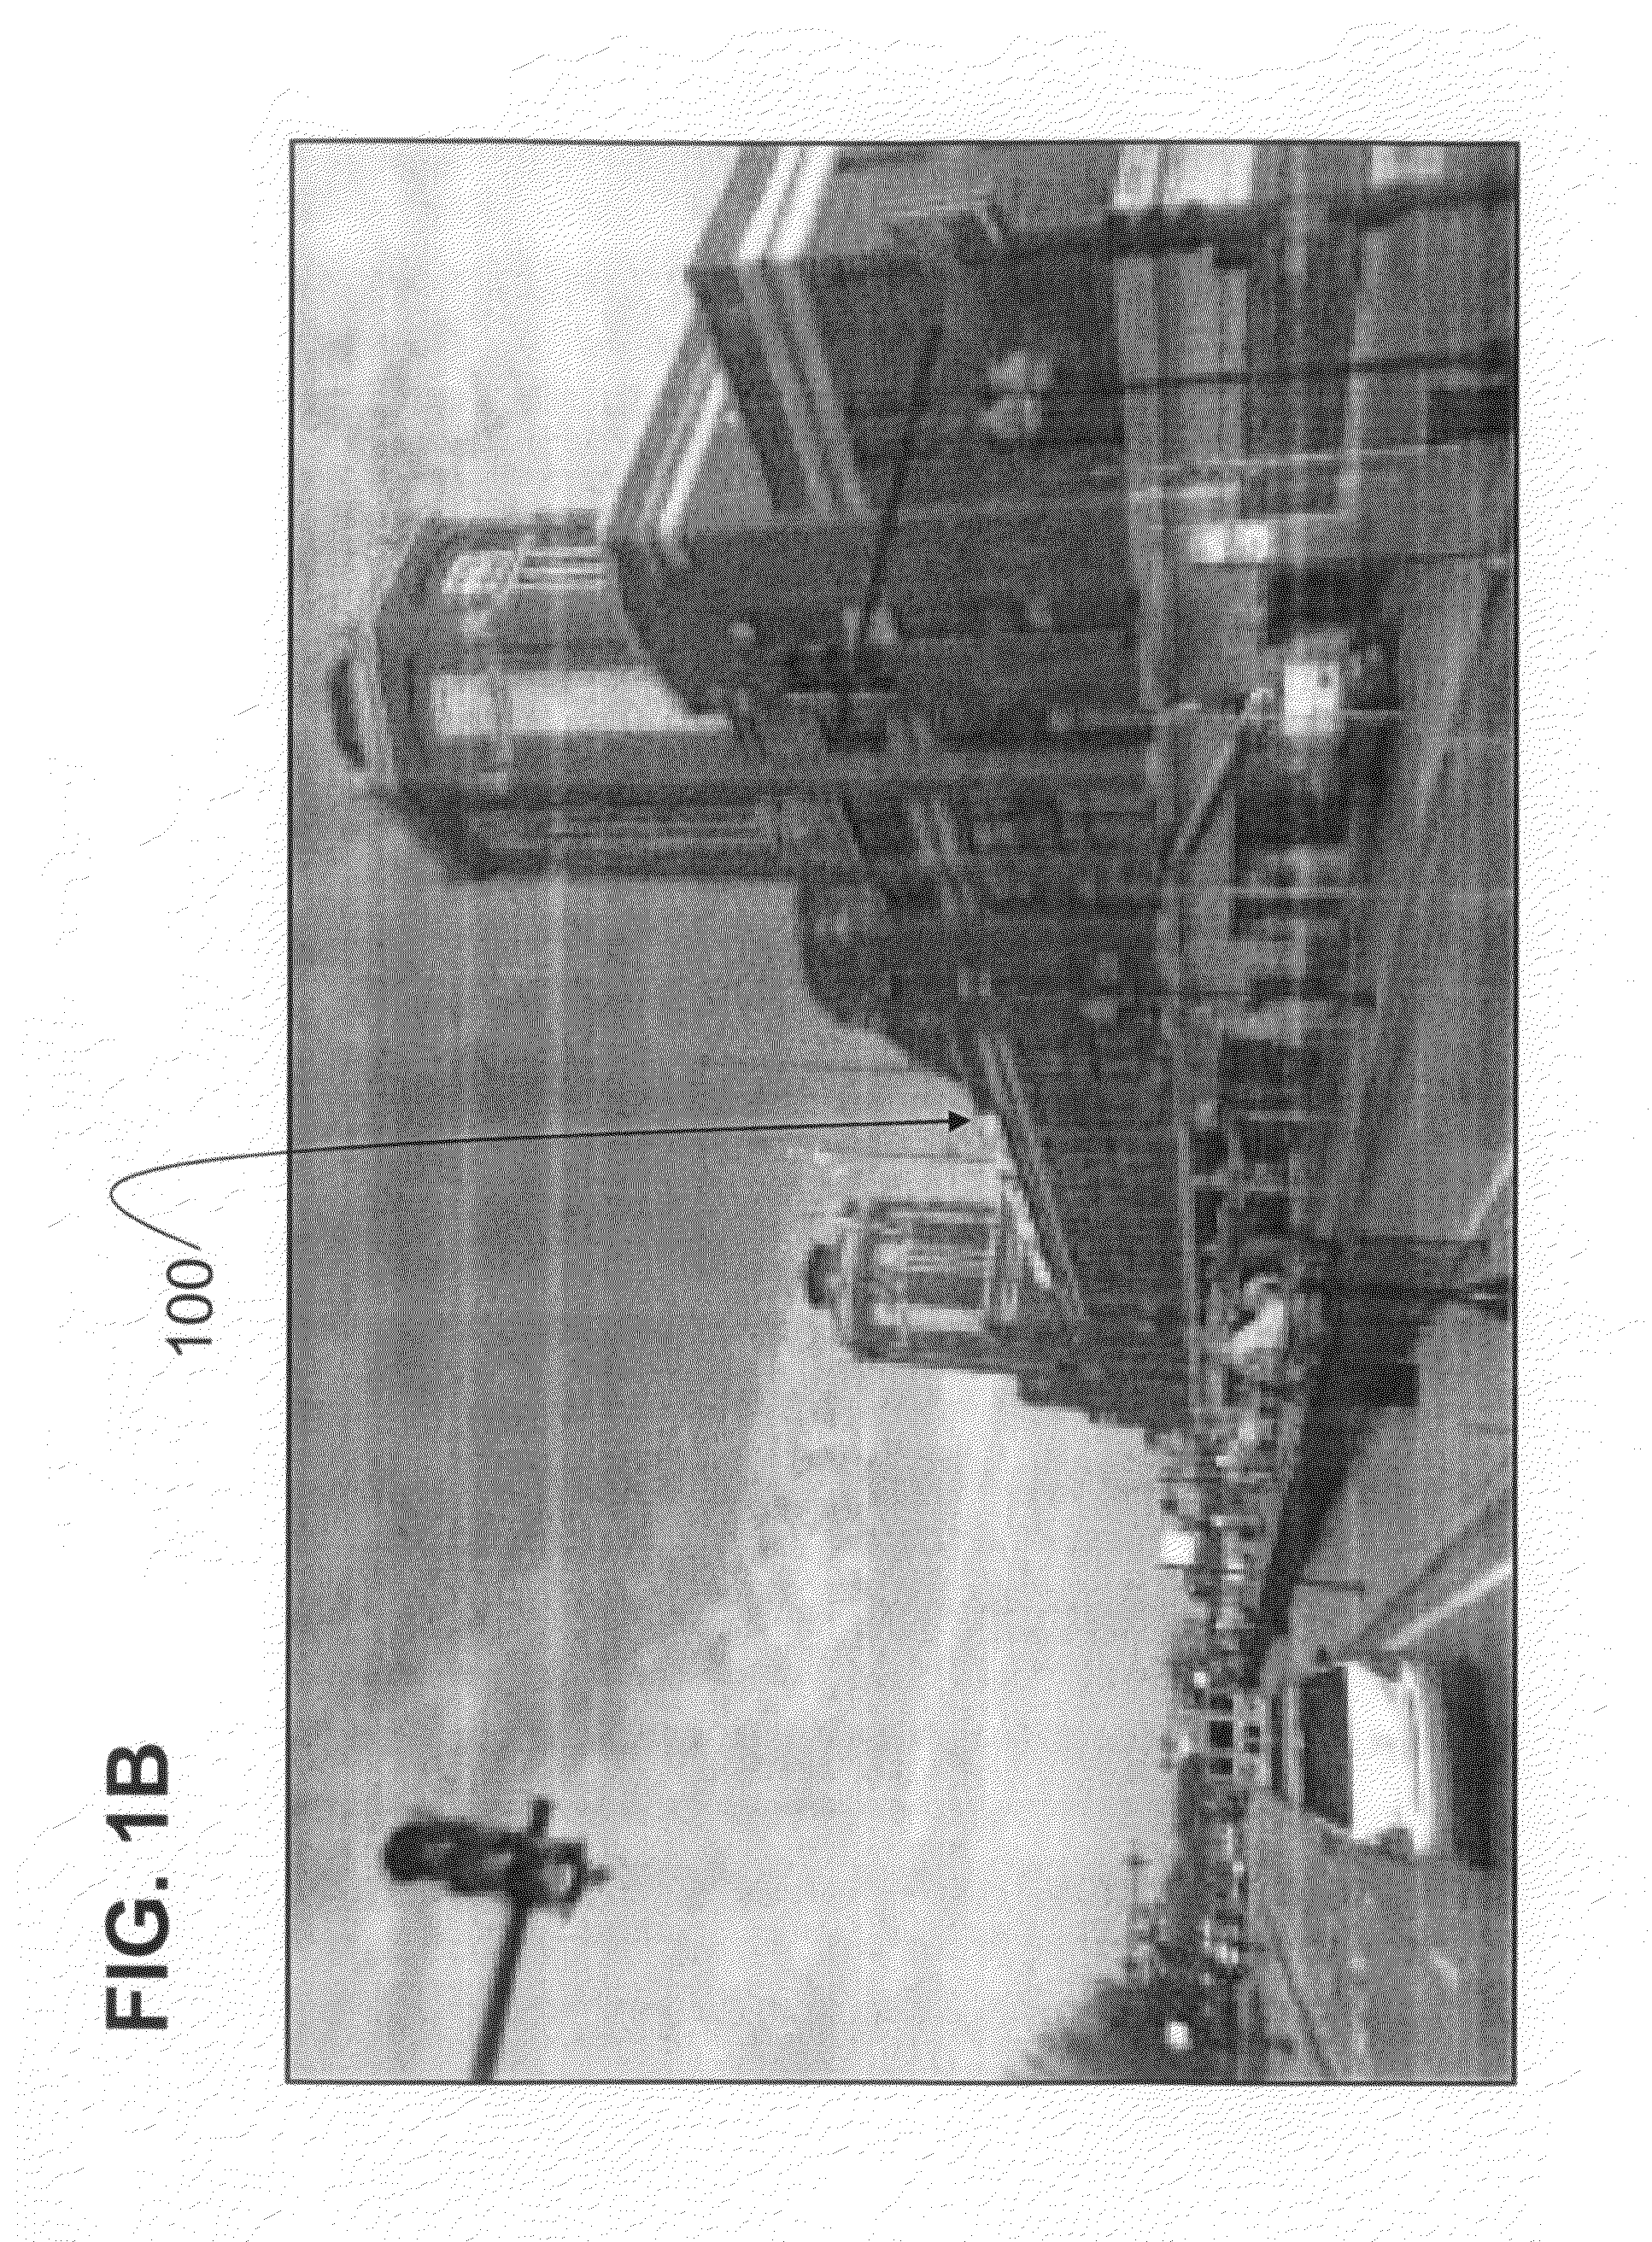 System and method for producing multi-angle views of an object-of-interest from images in an image dataset